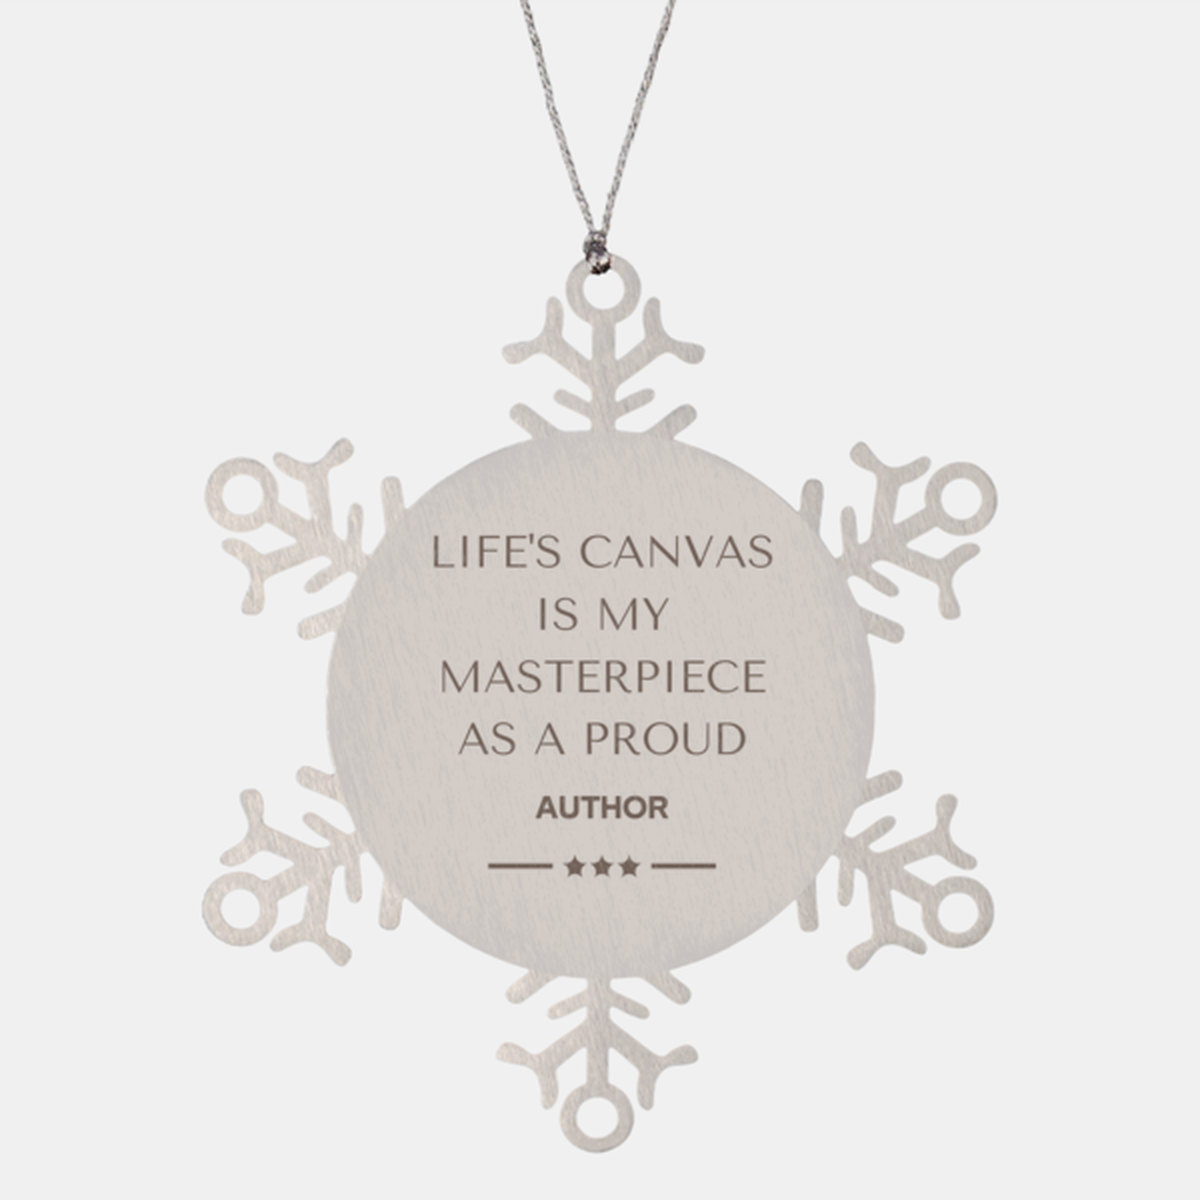 Proud Author Gifts, Life's canvas is my masterpiece, Epic Birthday Christmas Unique Snowflake Ornament For Author, Coworkers, Men, Women, Friends